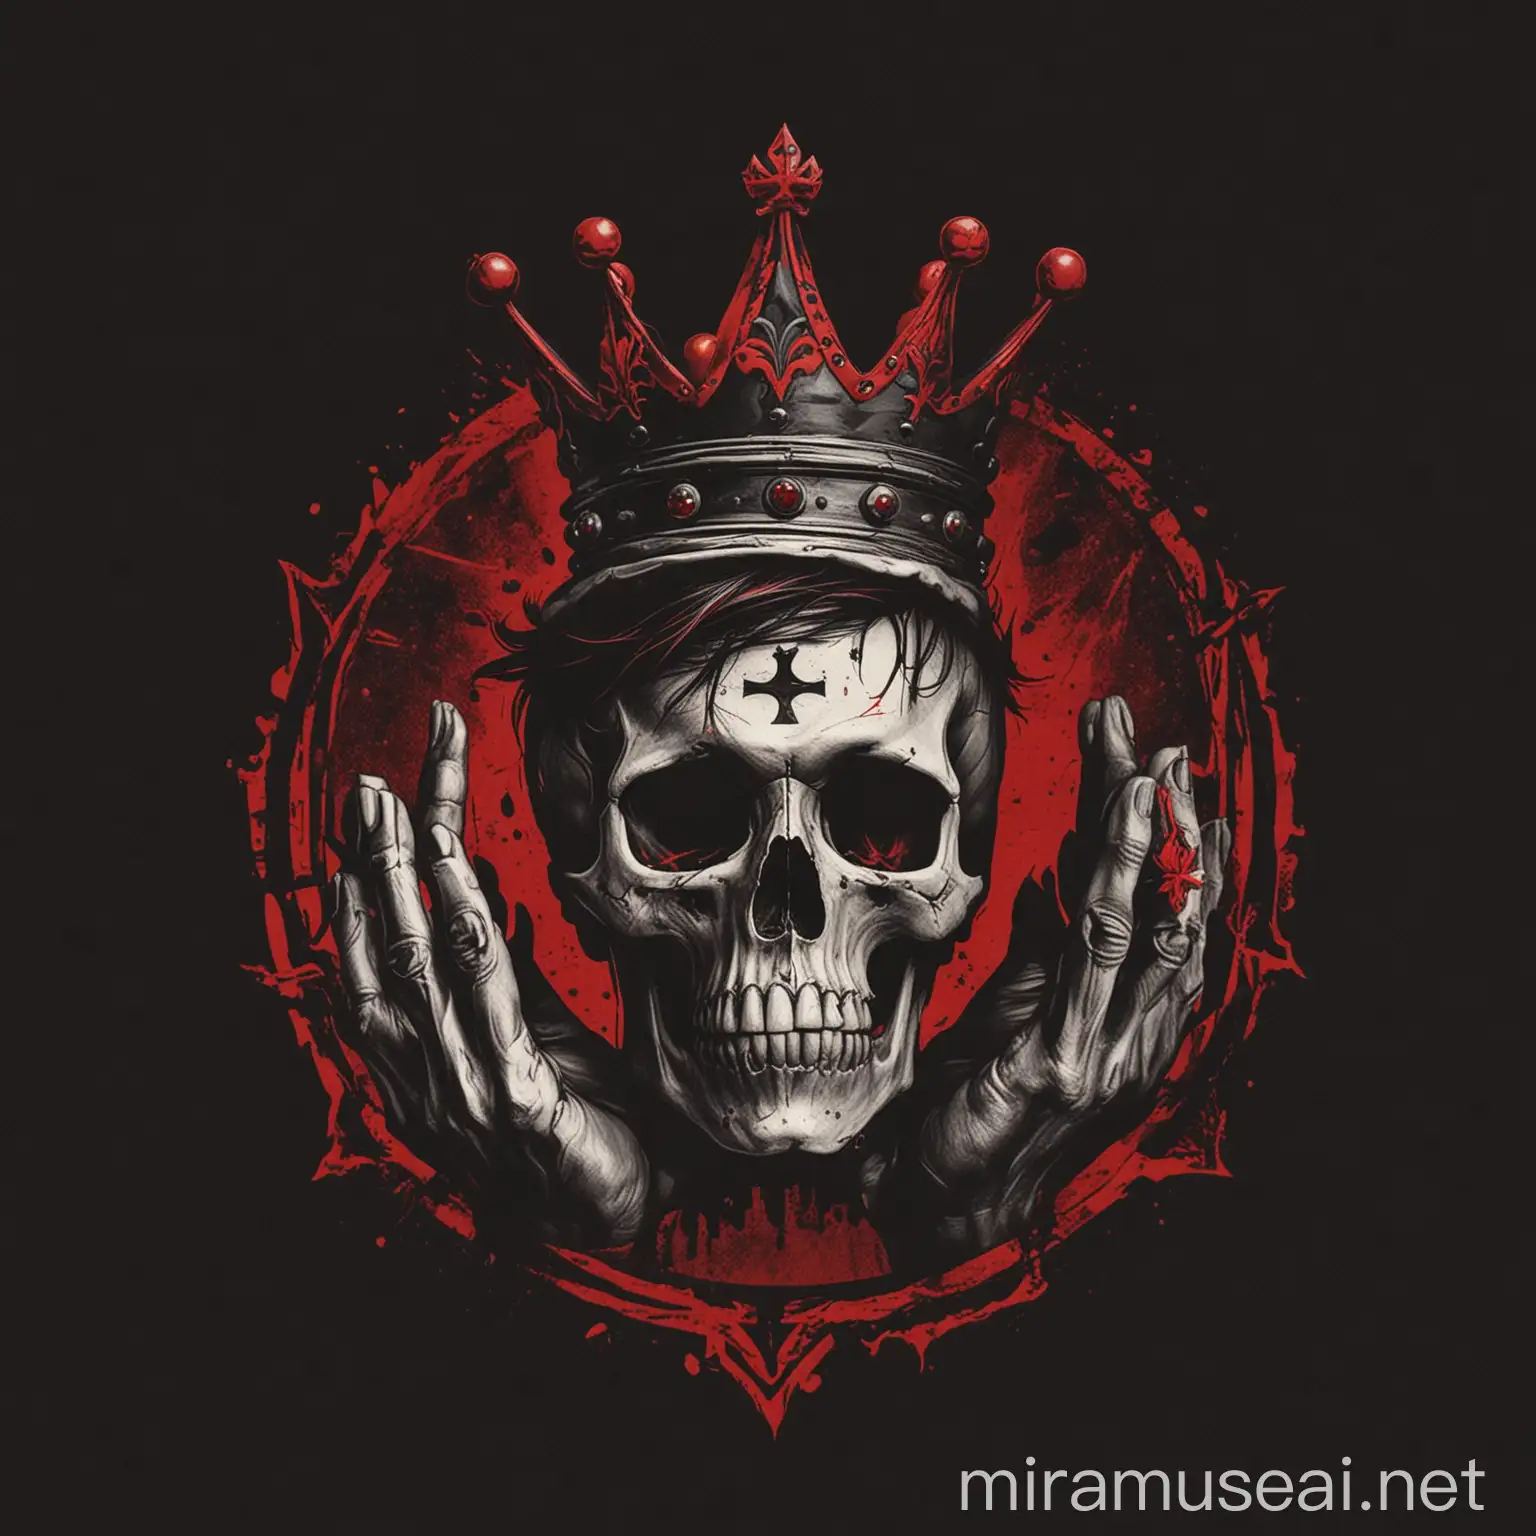 Black Hand Skull Crown Logo in Red and Black